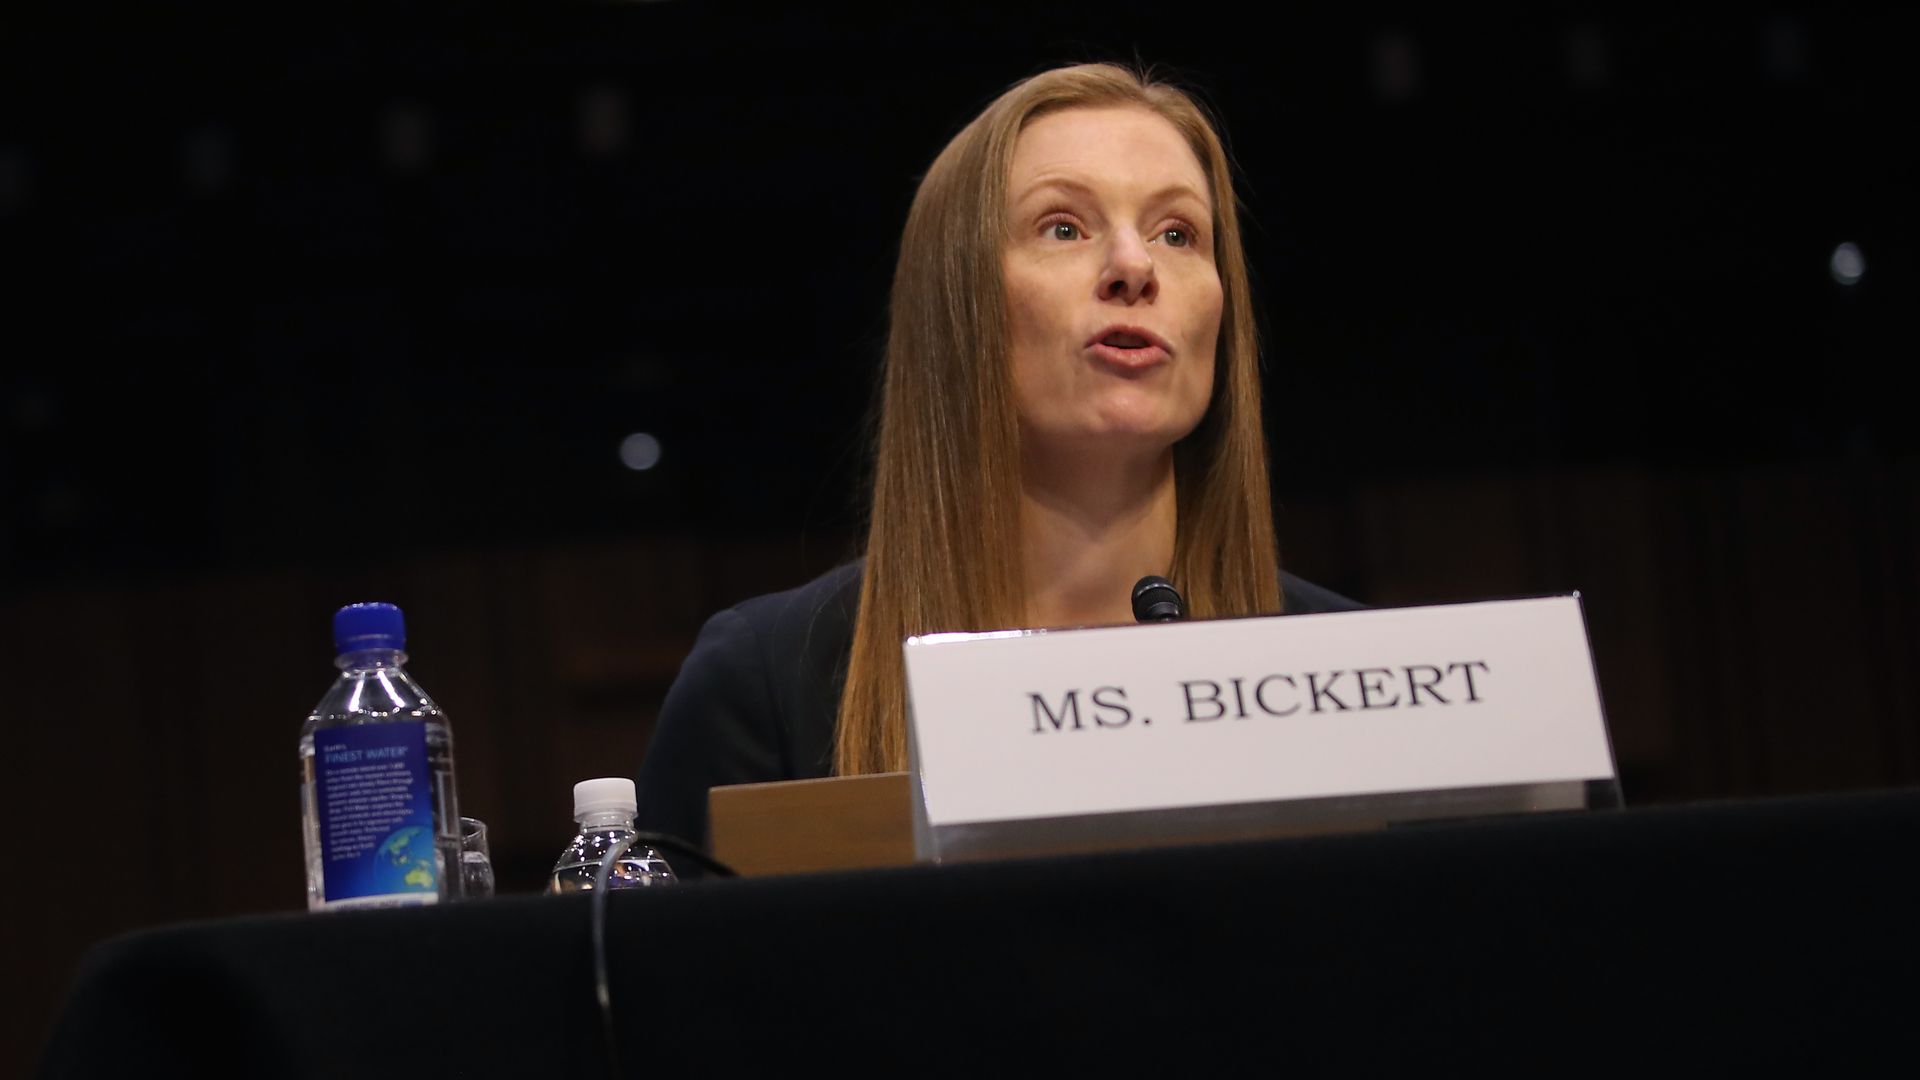 A photo of Facebook's Monika Bickert testifying at a table with a name plate in front of her.